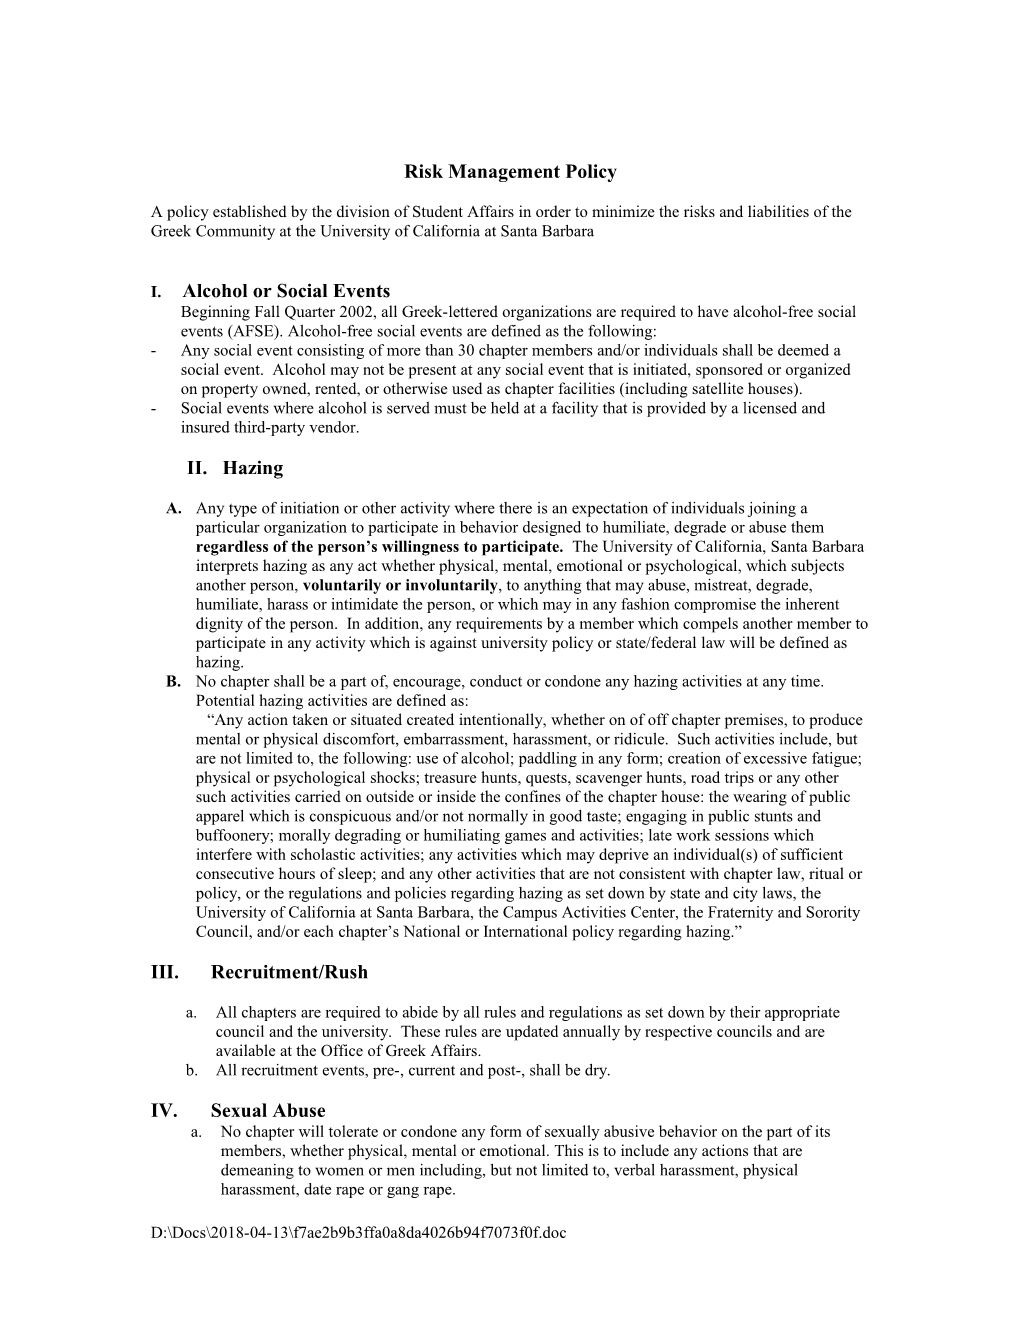 Risk Management Policy s1